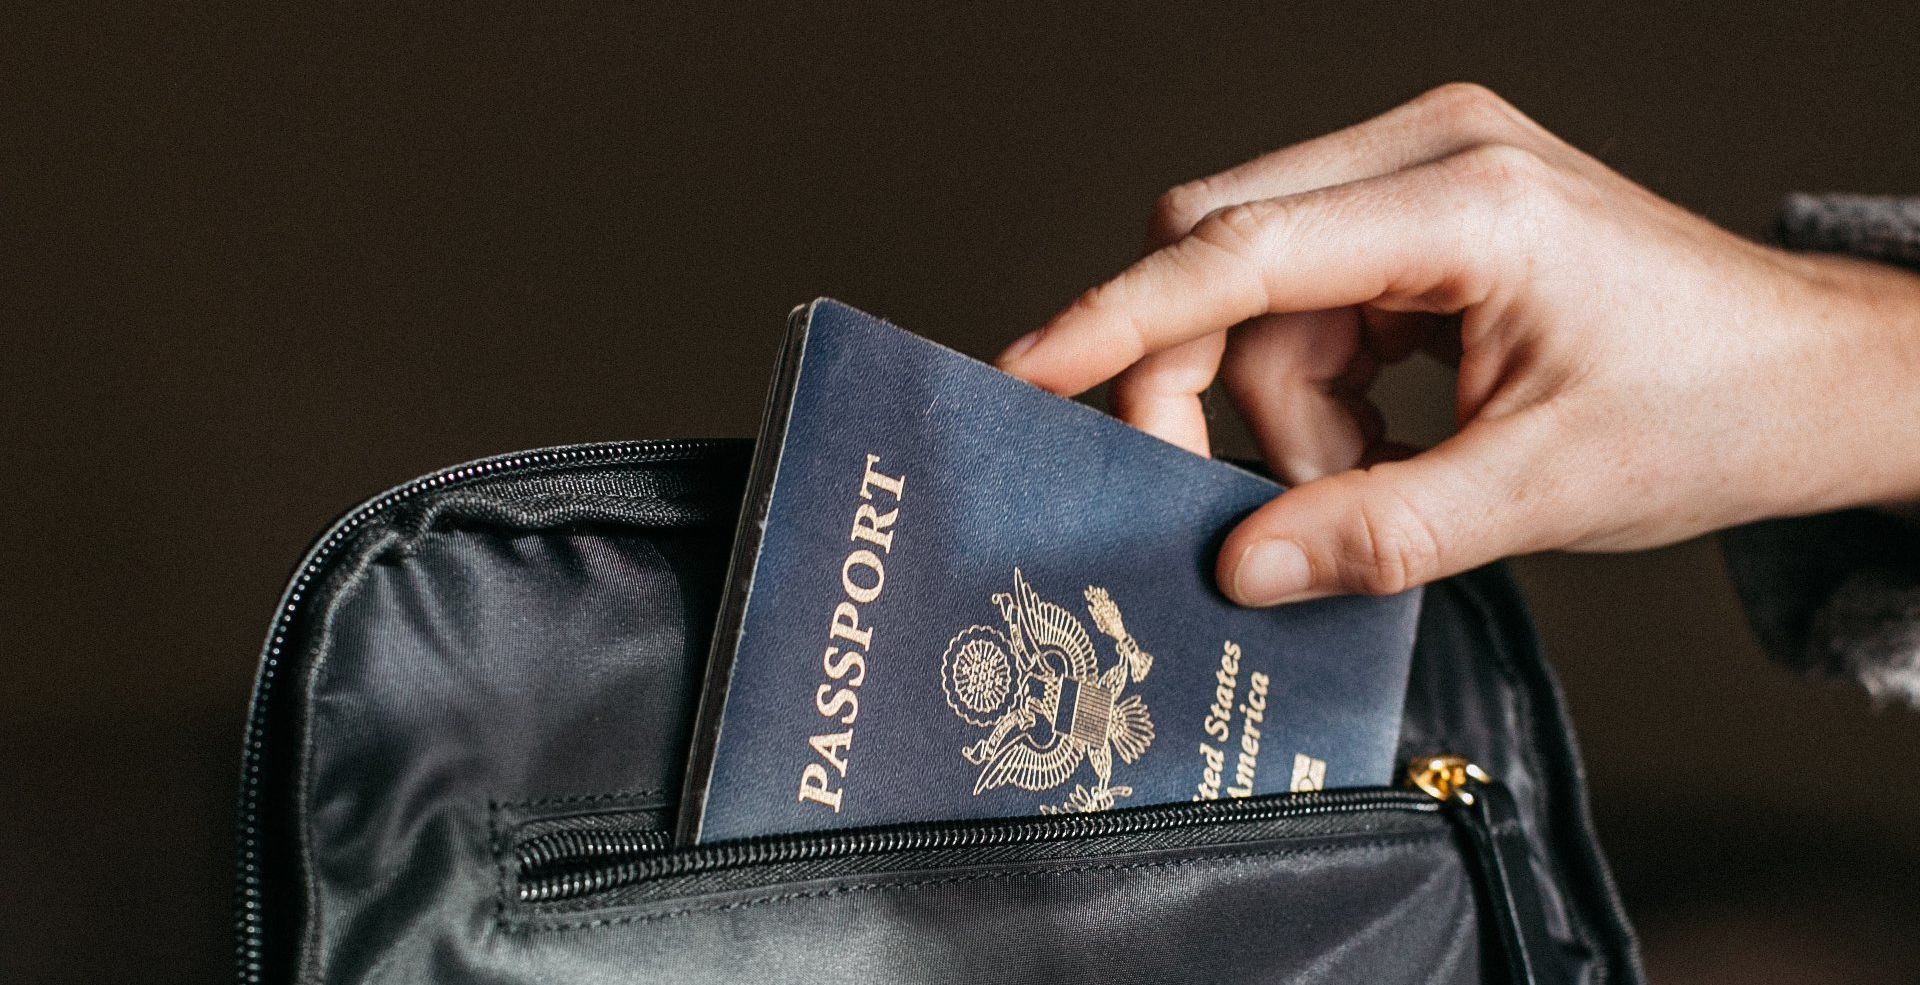 A person is taking a passport out of a black bag